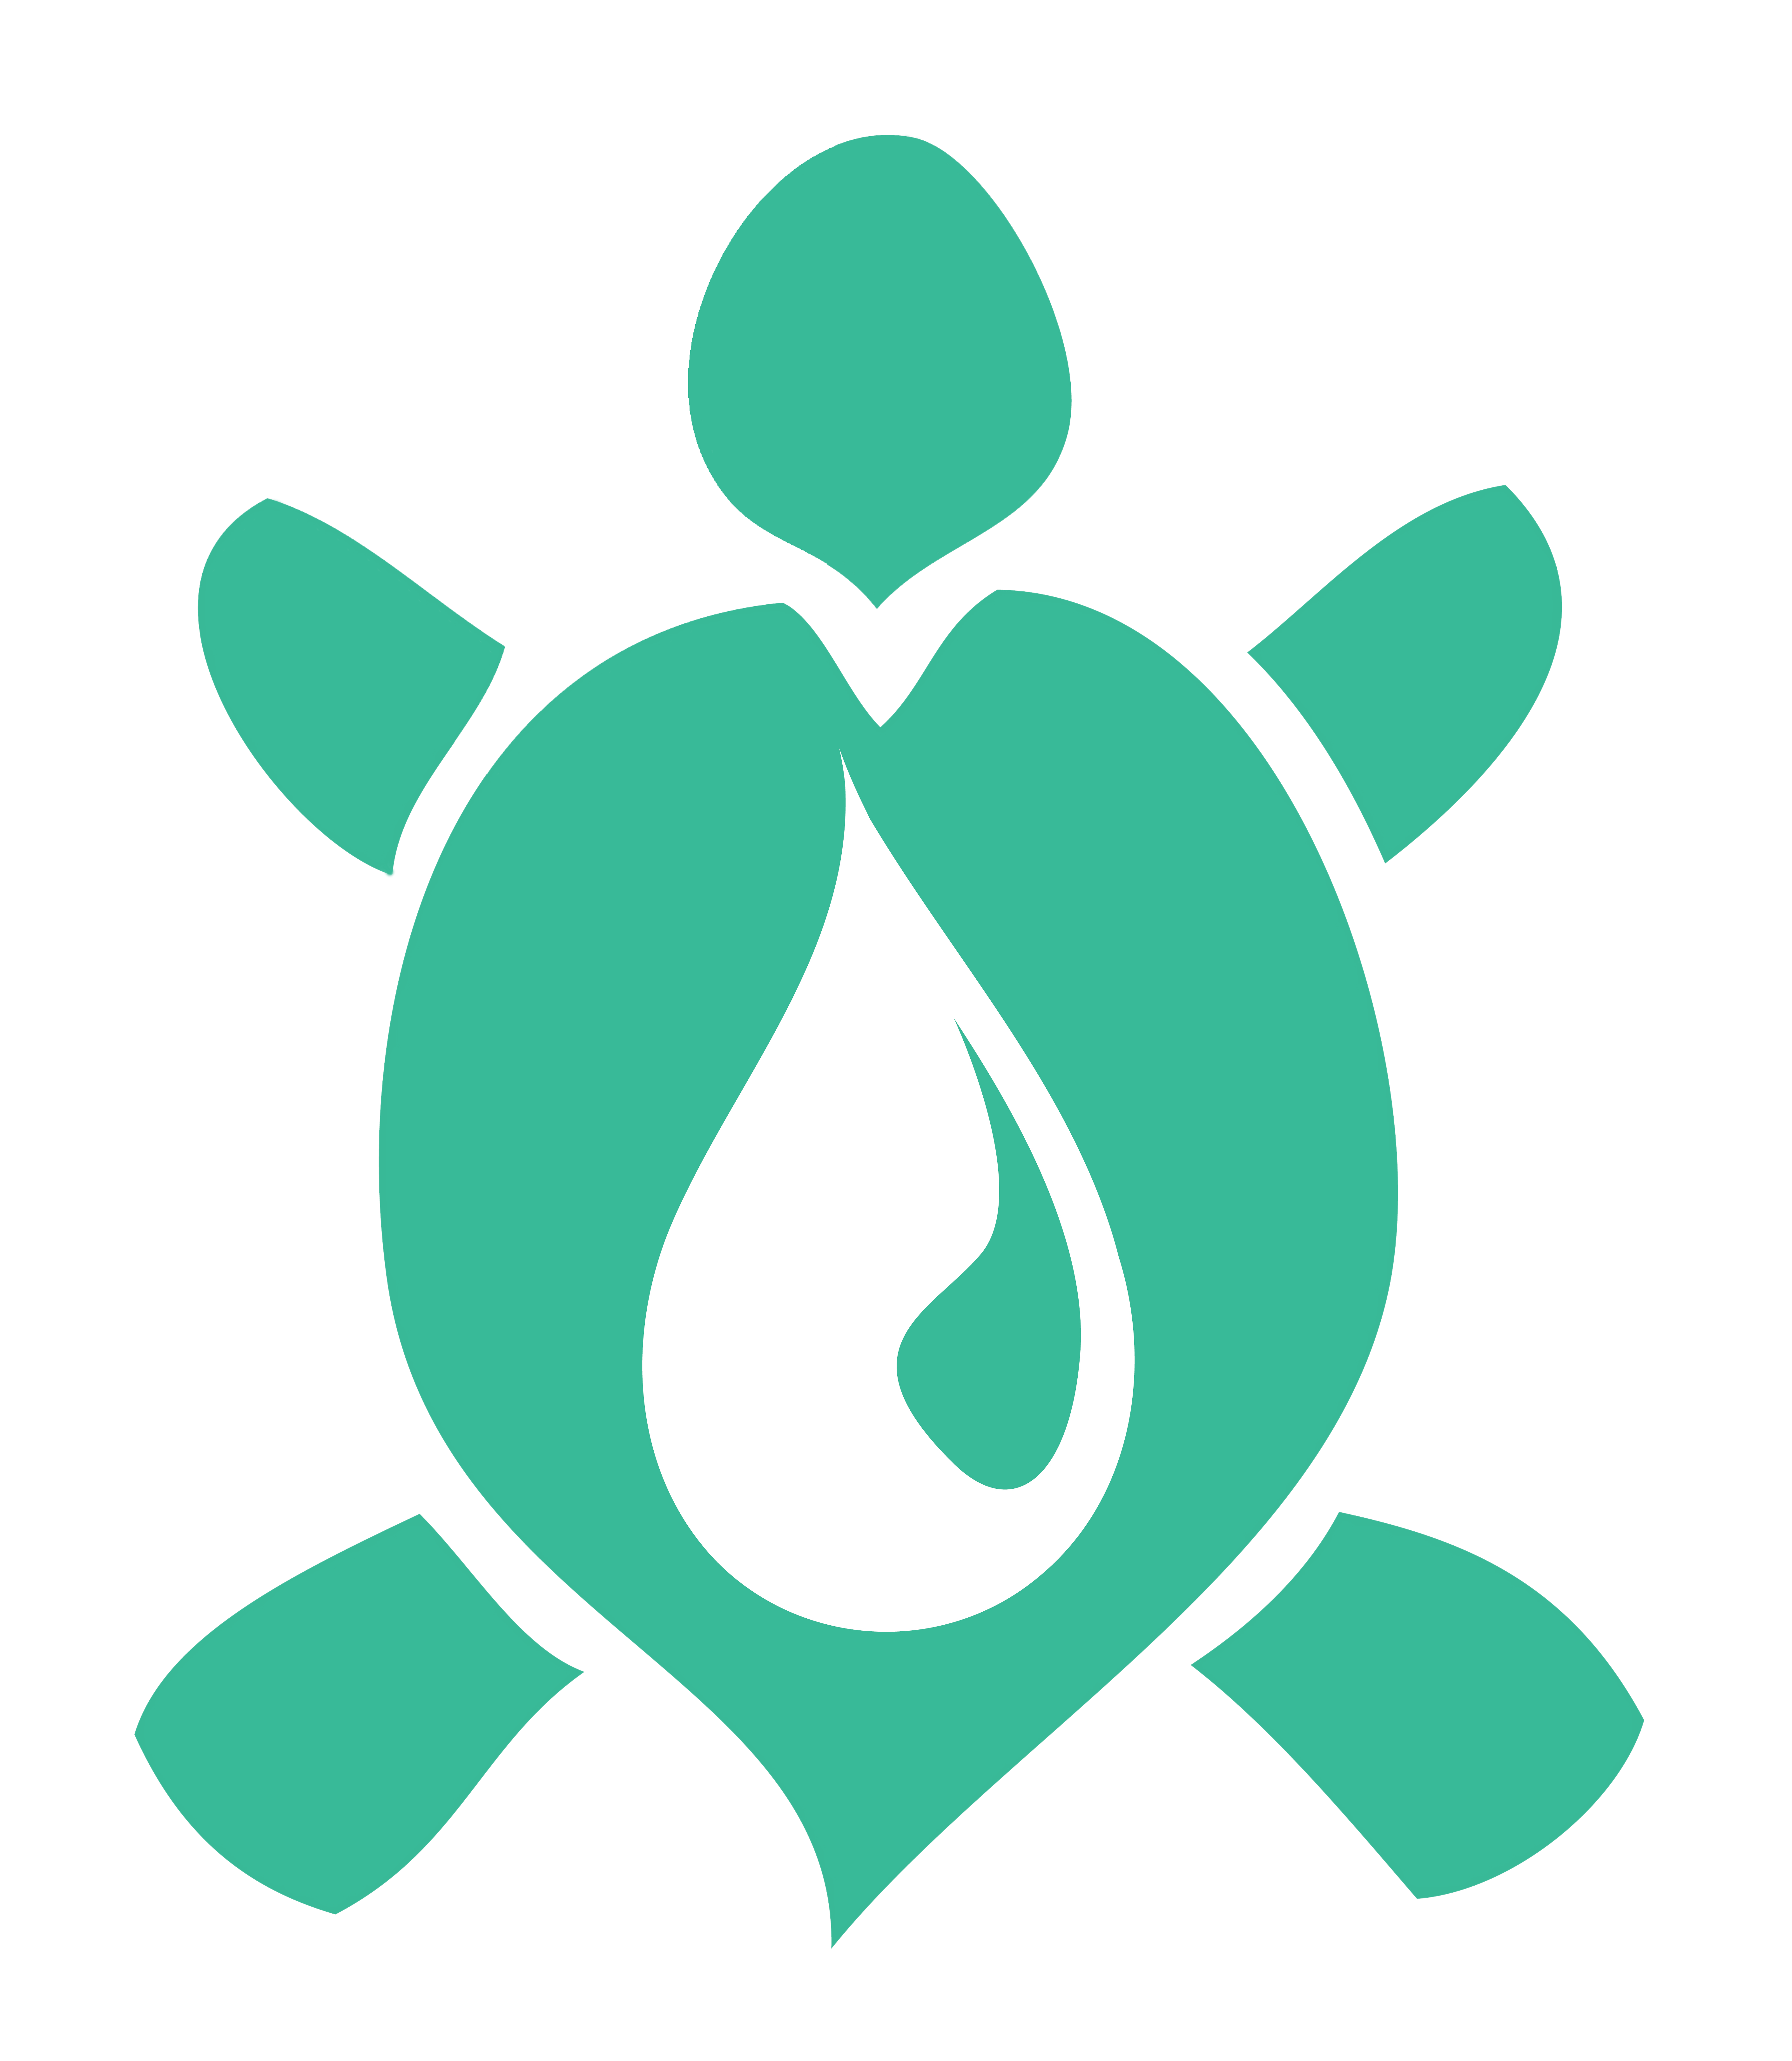 UMD's Green Terp water icon